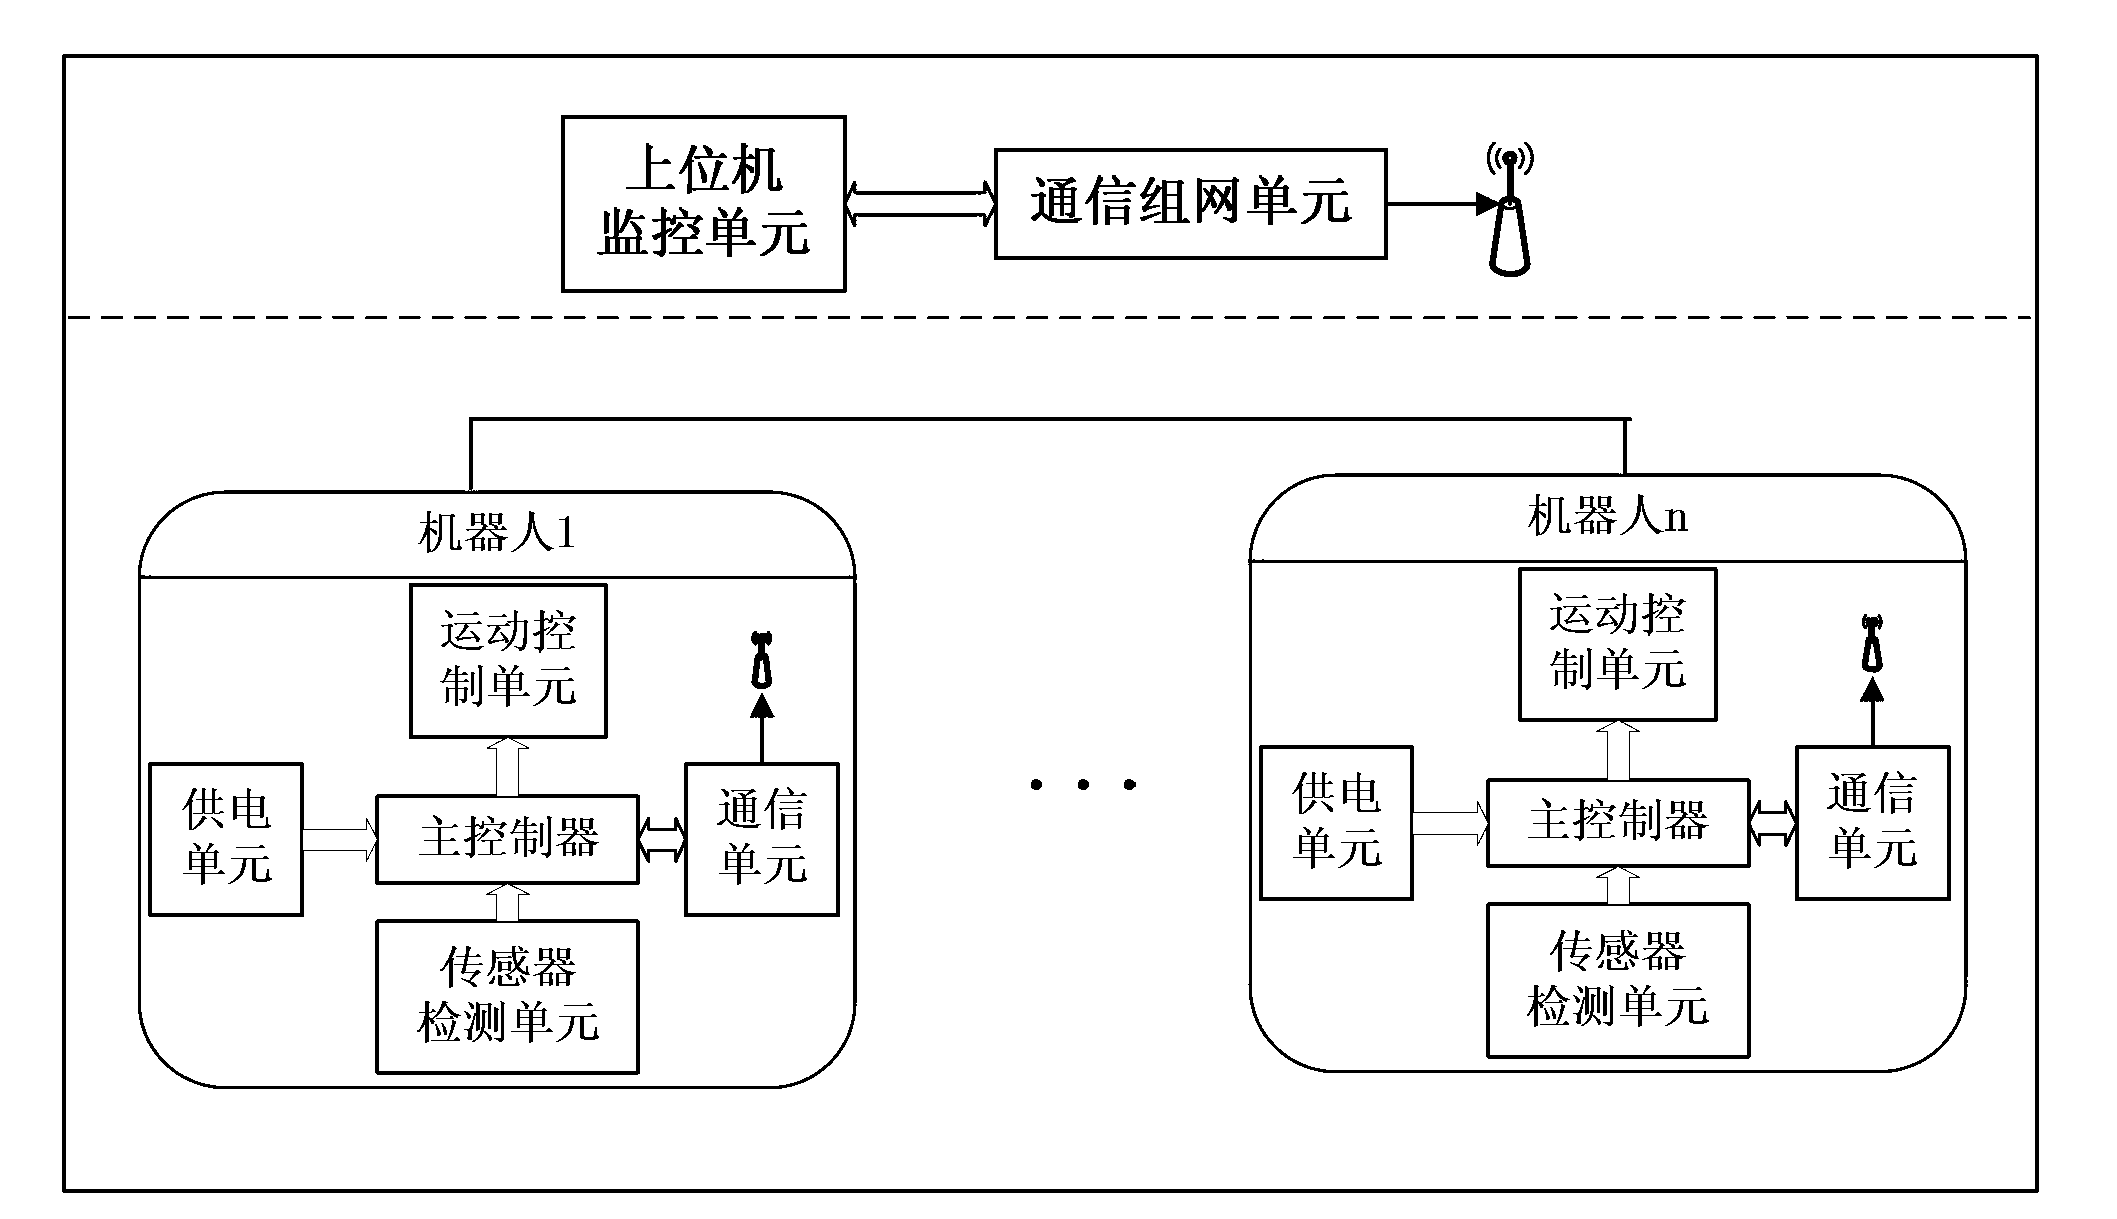 Networked distribution type multiple-mobile-robot system